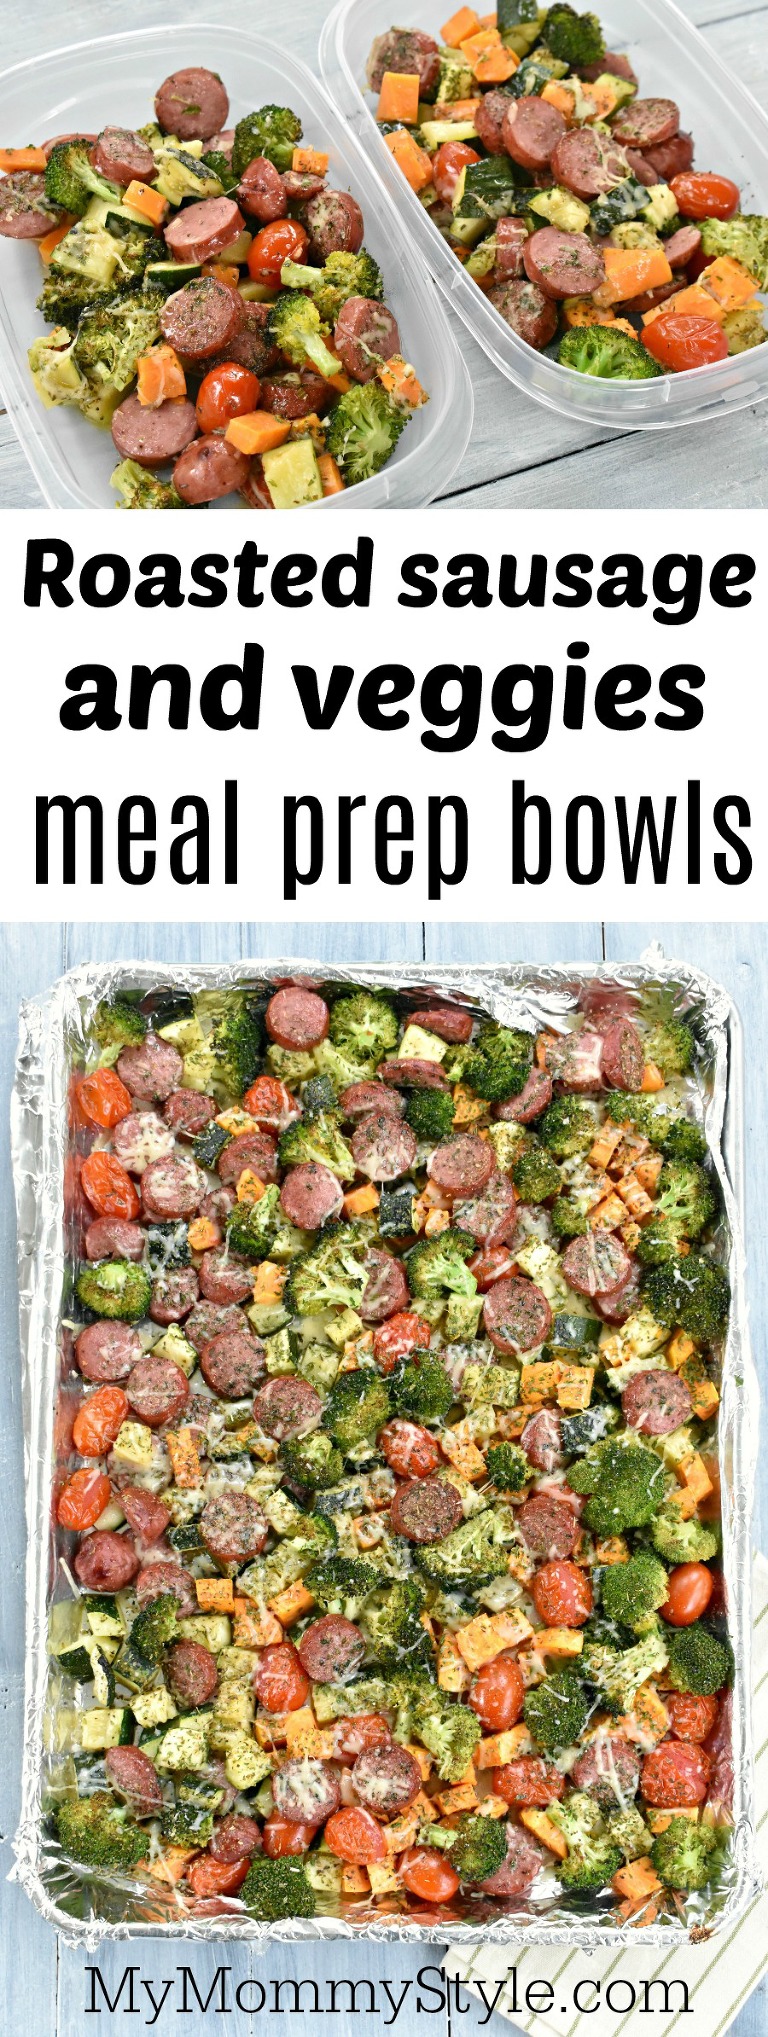 https://www.mymommystyle.com/wp-content/uploads/2017/07/10-21820-post/roasted-sausage-and-veggies-meal-prep-bowls(pp_w768_h2037).jpg